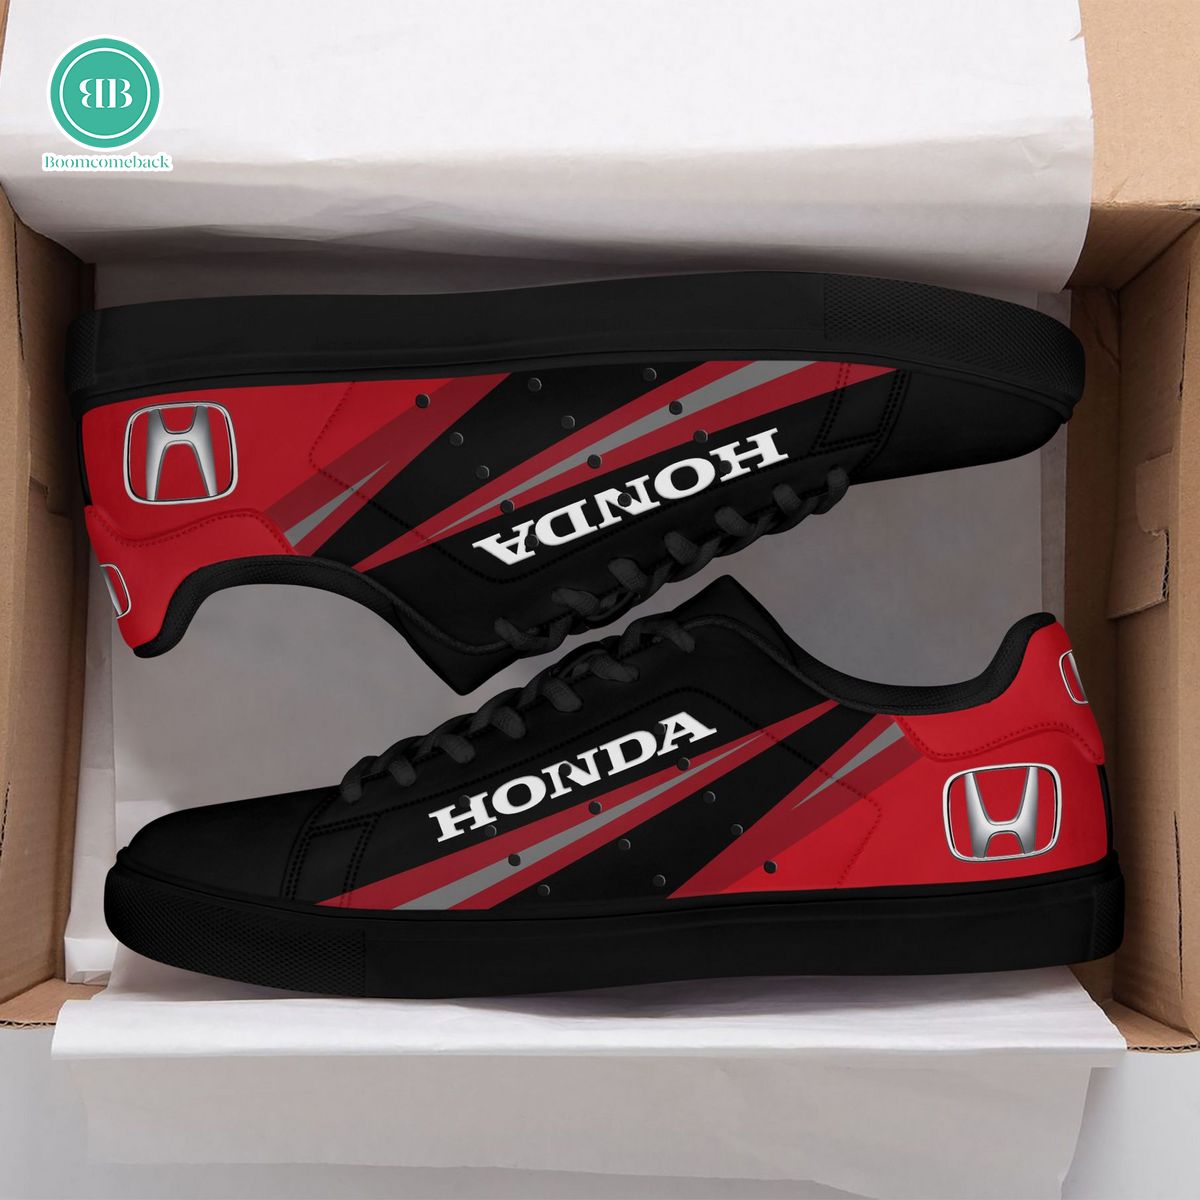 Honda Black And Red Adidas Stan Smith Shoes